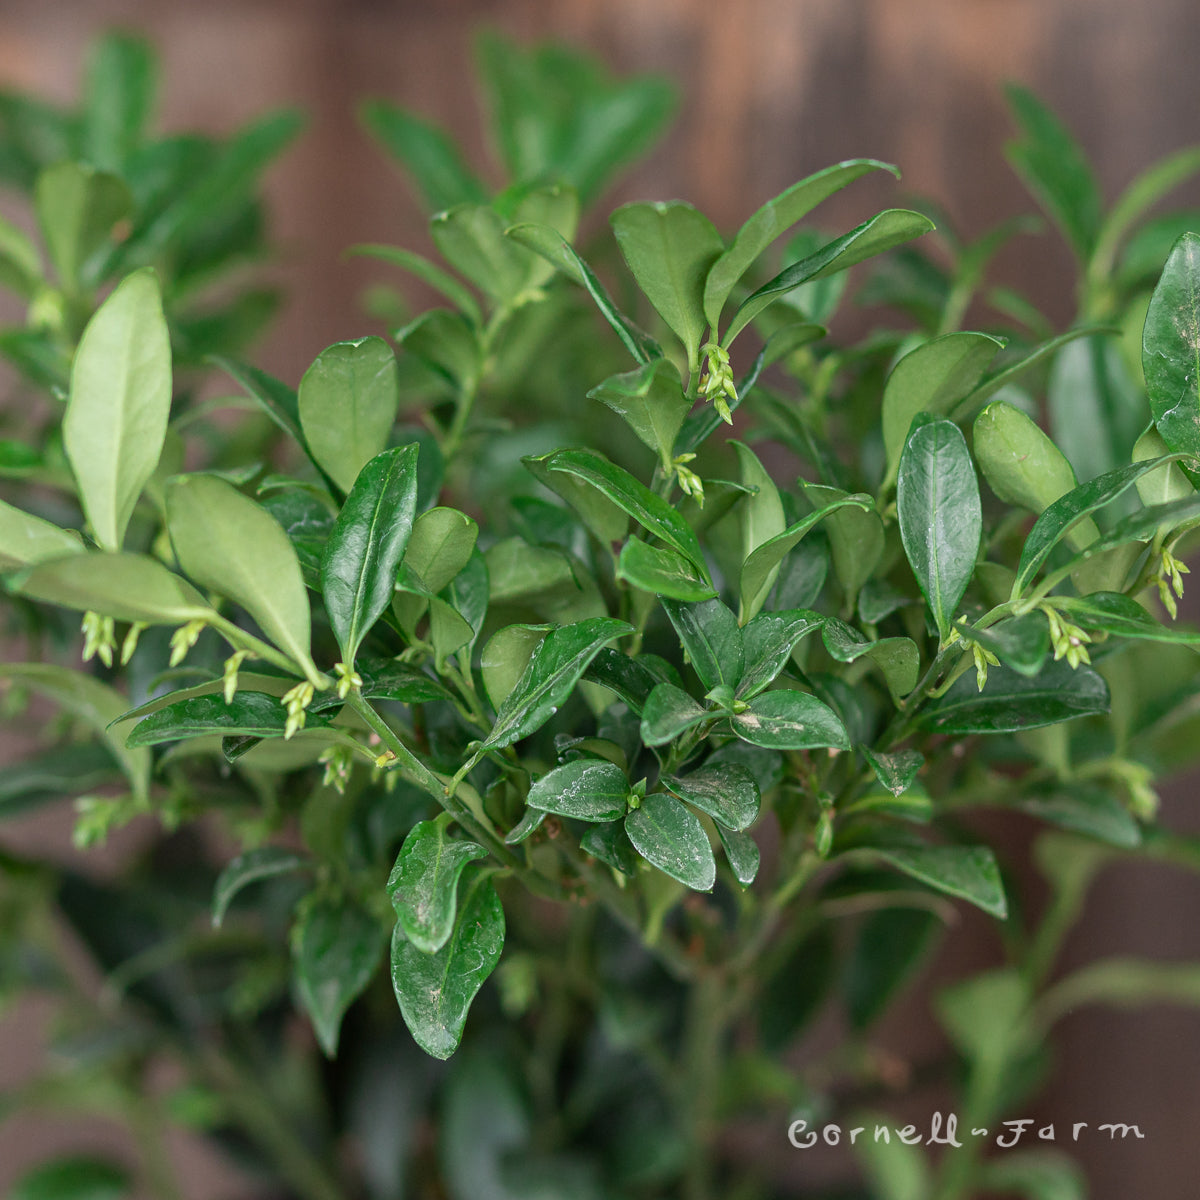 Sarcococca ruscifolia 5gal Fragrant Sweetbox